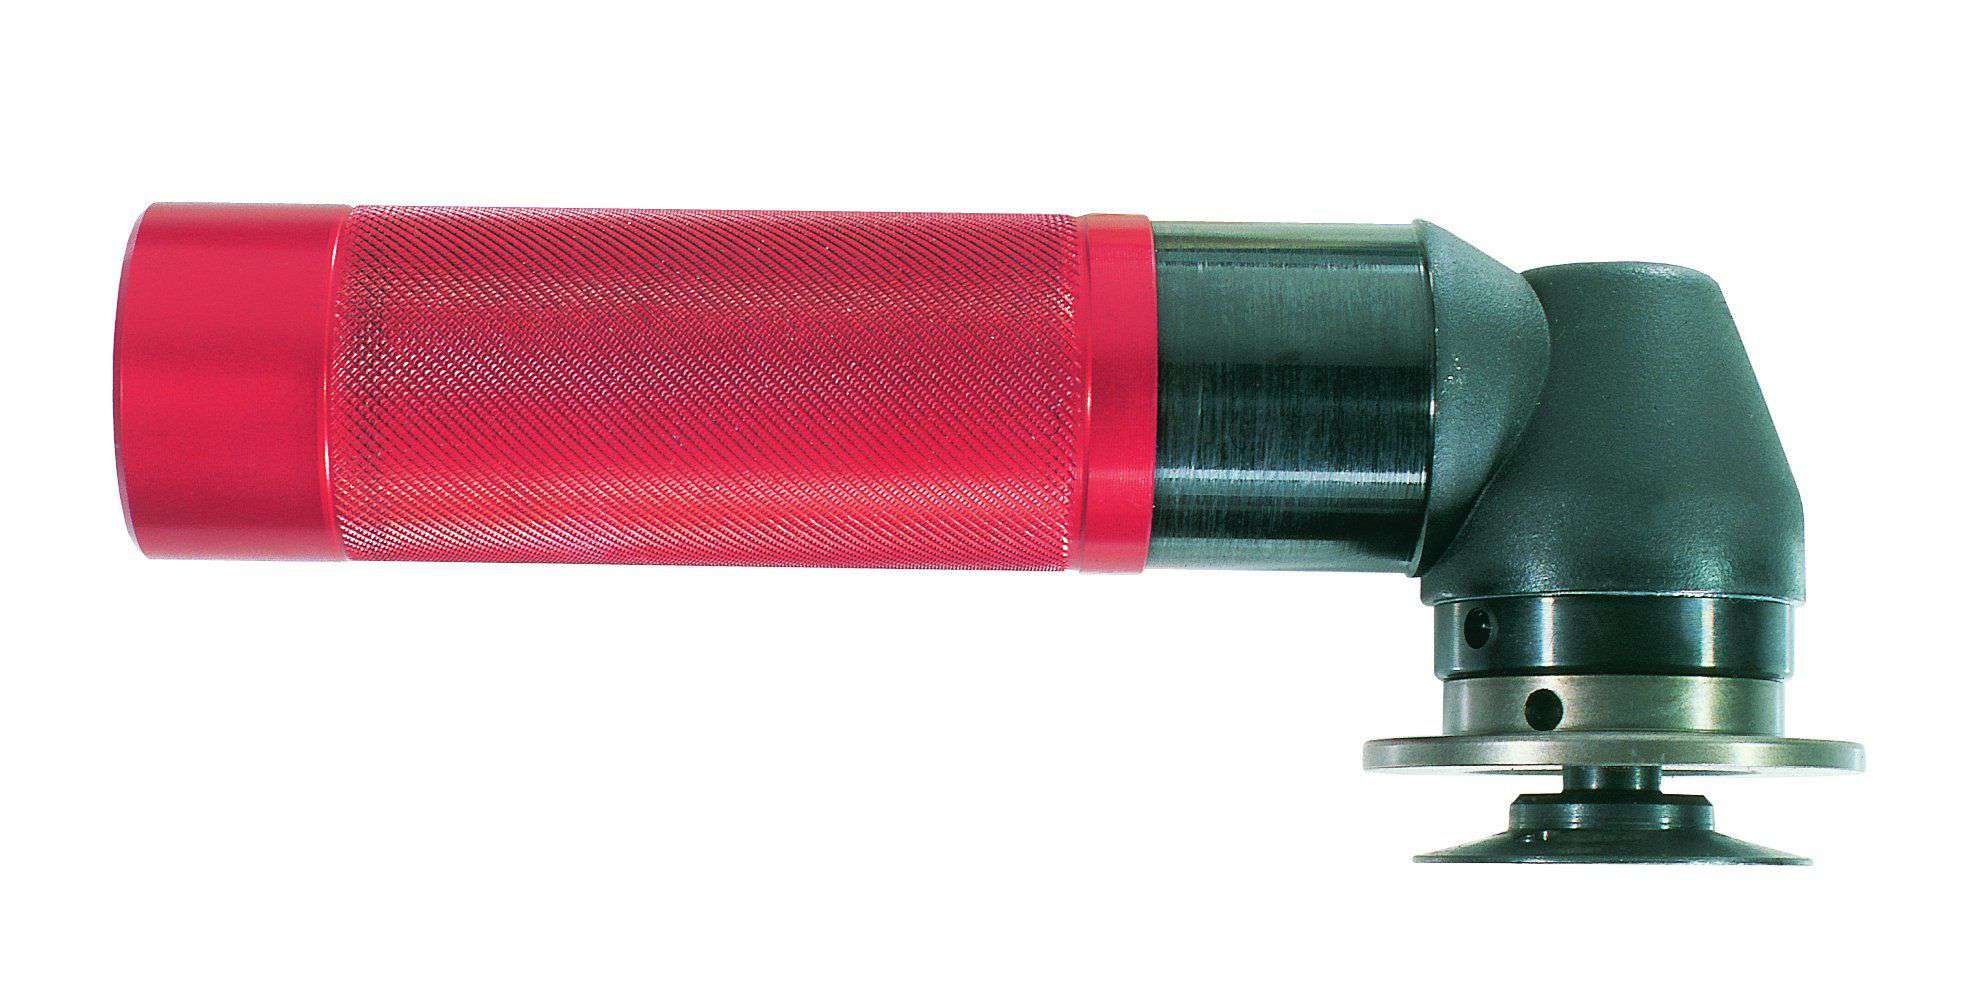 Suhner WI 10-S Special Toolholder With Mounting and Internal Thread, G 28 Connection, 1.54' Width